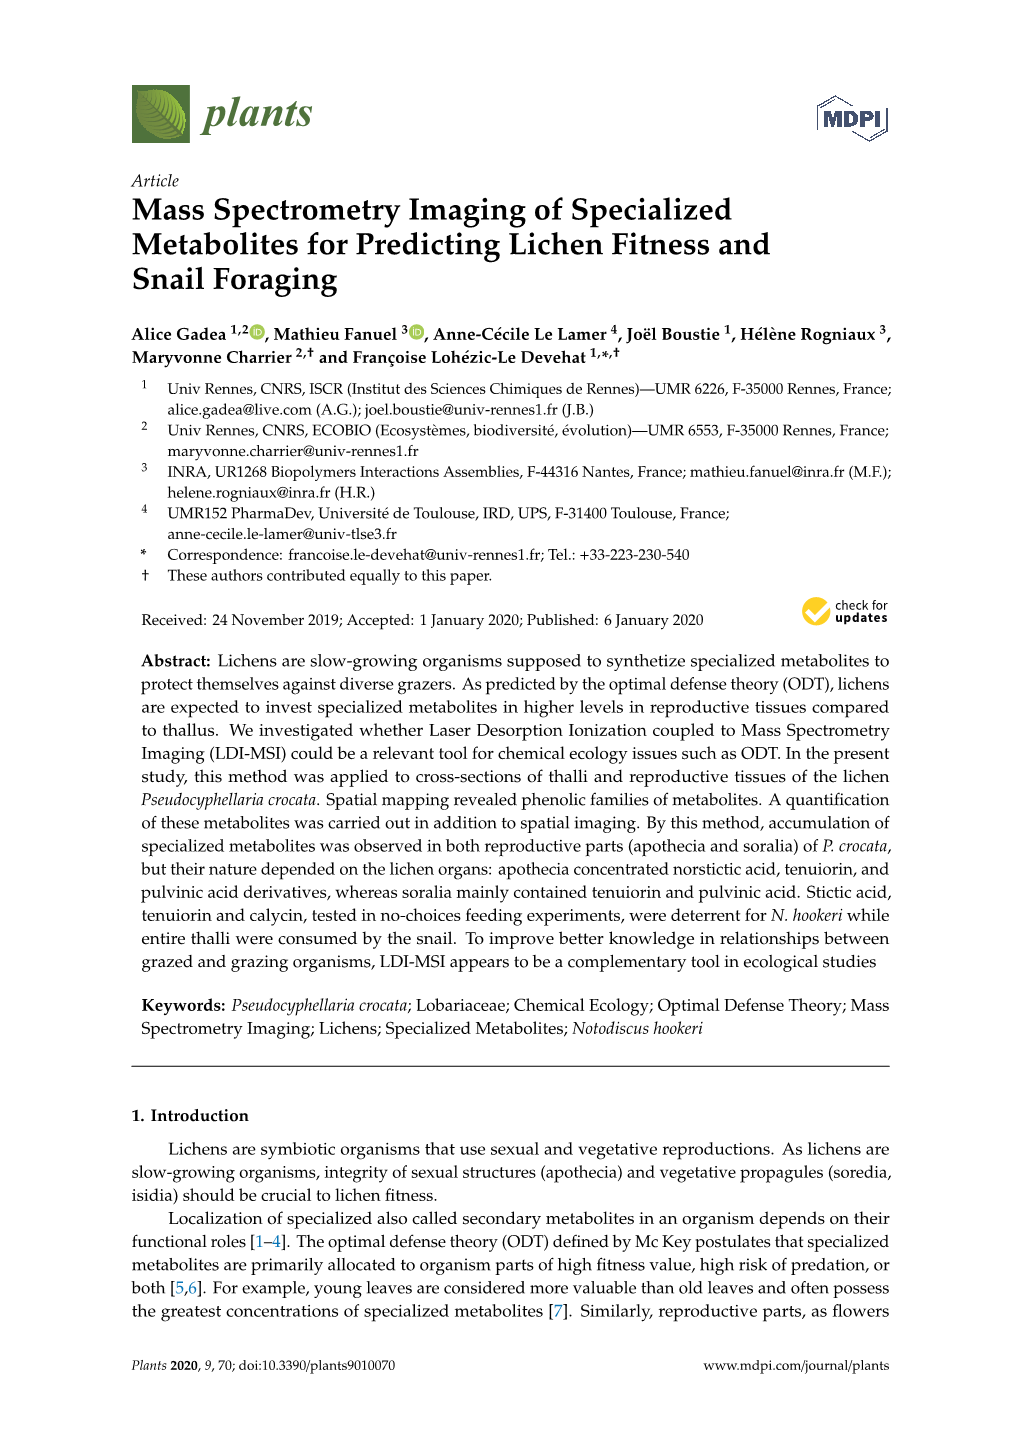 Mass Spectrometry Imaging of Specialized Metabolites for Predicting Lichen Fitness and Snail Foraging